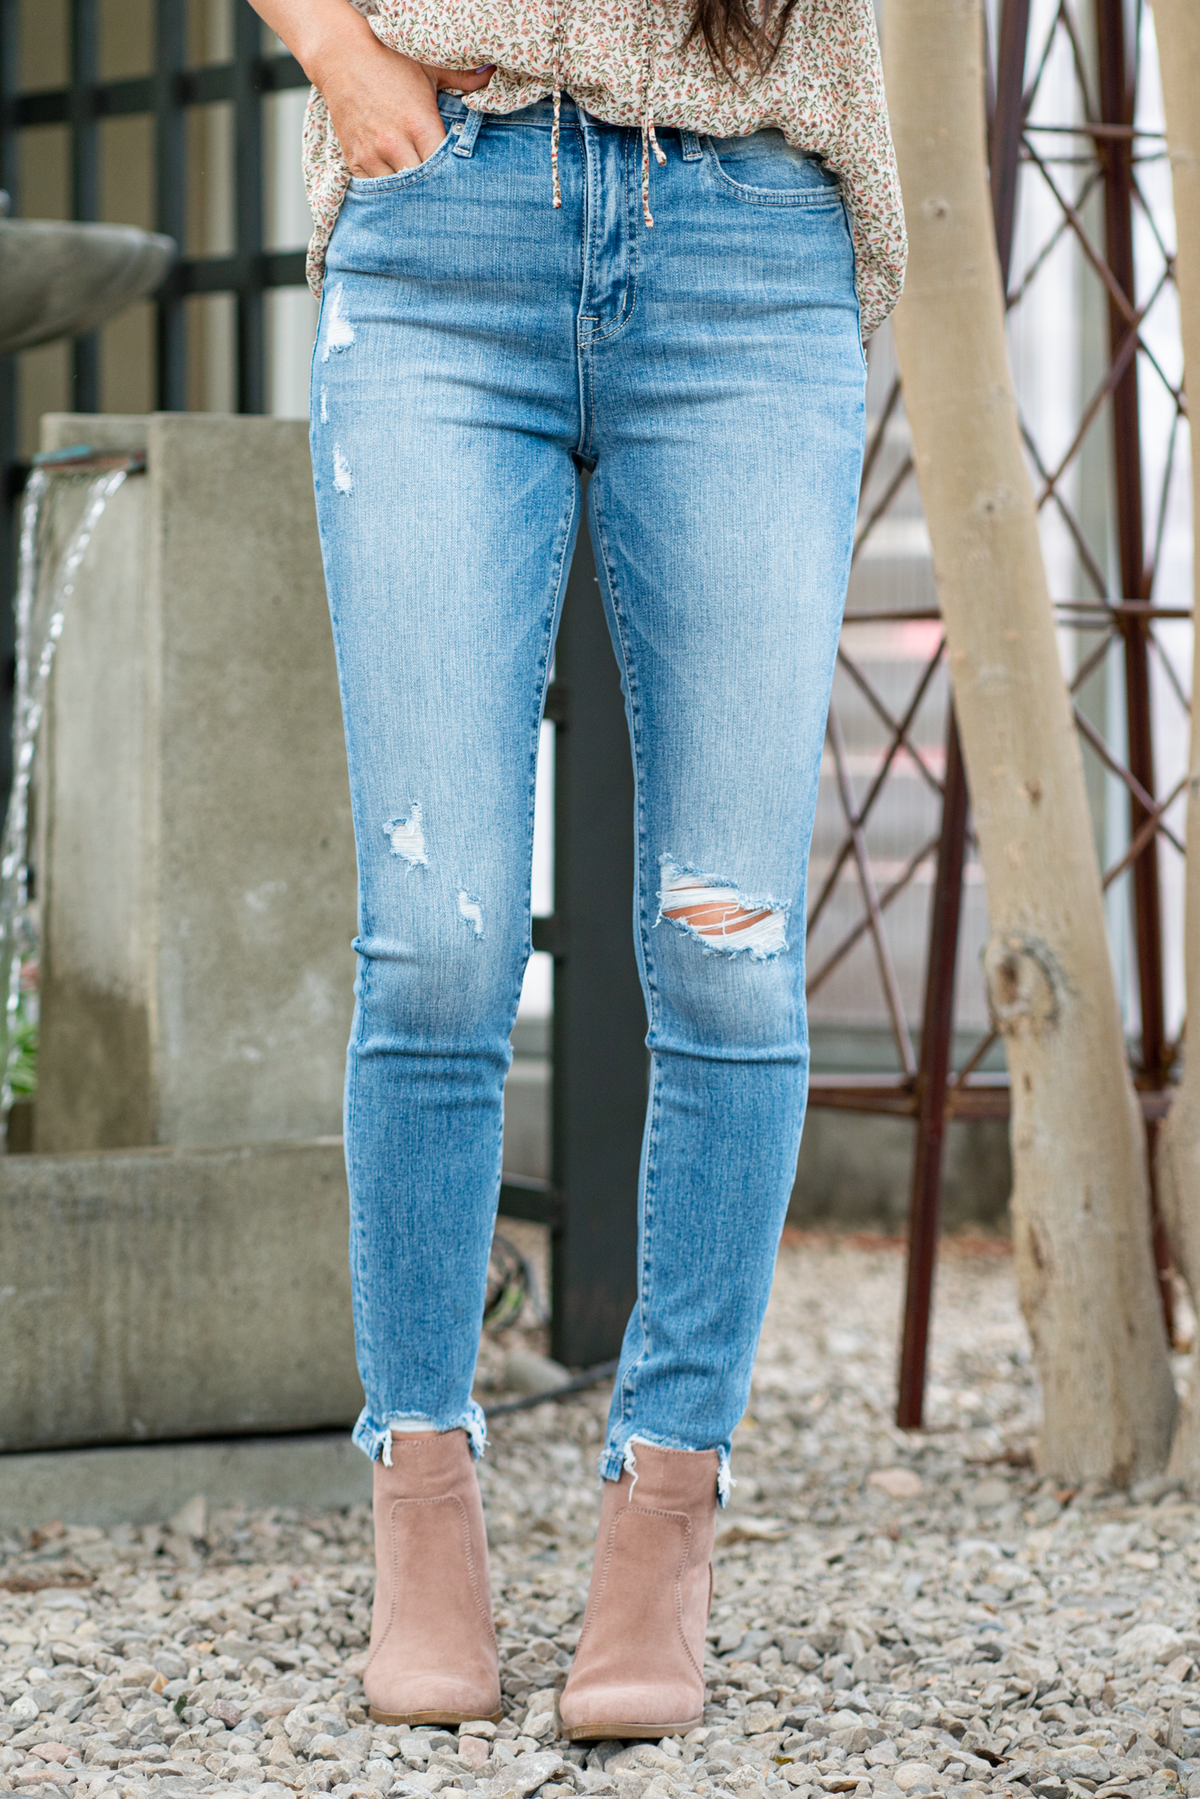 Denim by Zenana   Color: : Medium Blue Wash  Cut: Skinny Fit, 27" Inseam*  Rise: High-Rise, 10.25" Front Rise* 98% COTTON 2% SPANDEX Fly: Zipper Fly  Style #: DPP-1708MM Contact us for any additional measurements or sizing.   *Measured on the smallest size, measurements may vary by size.  